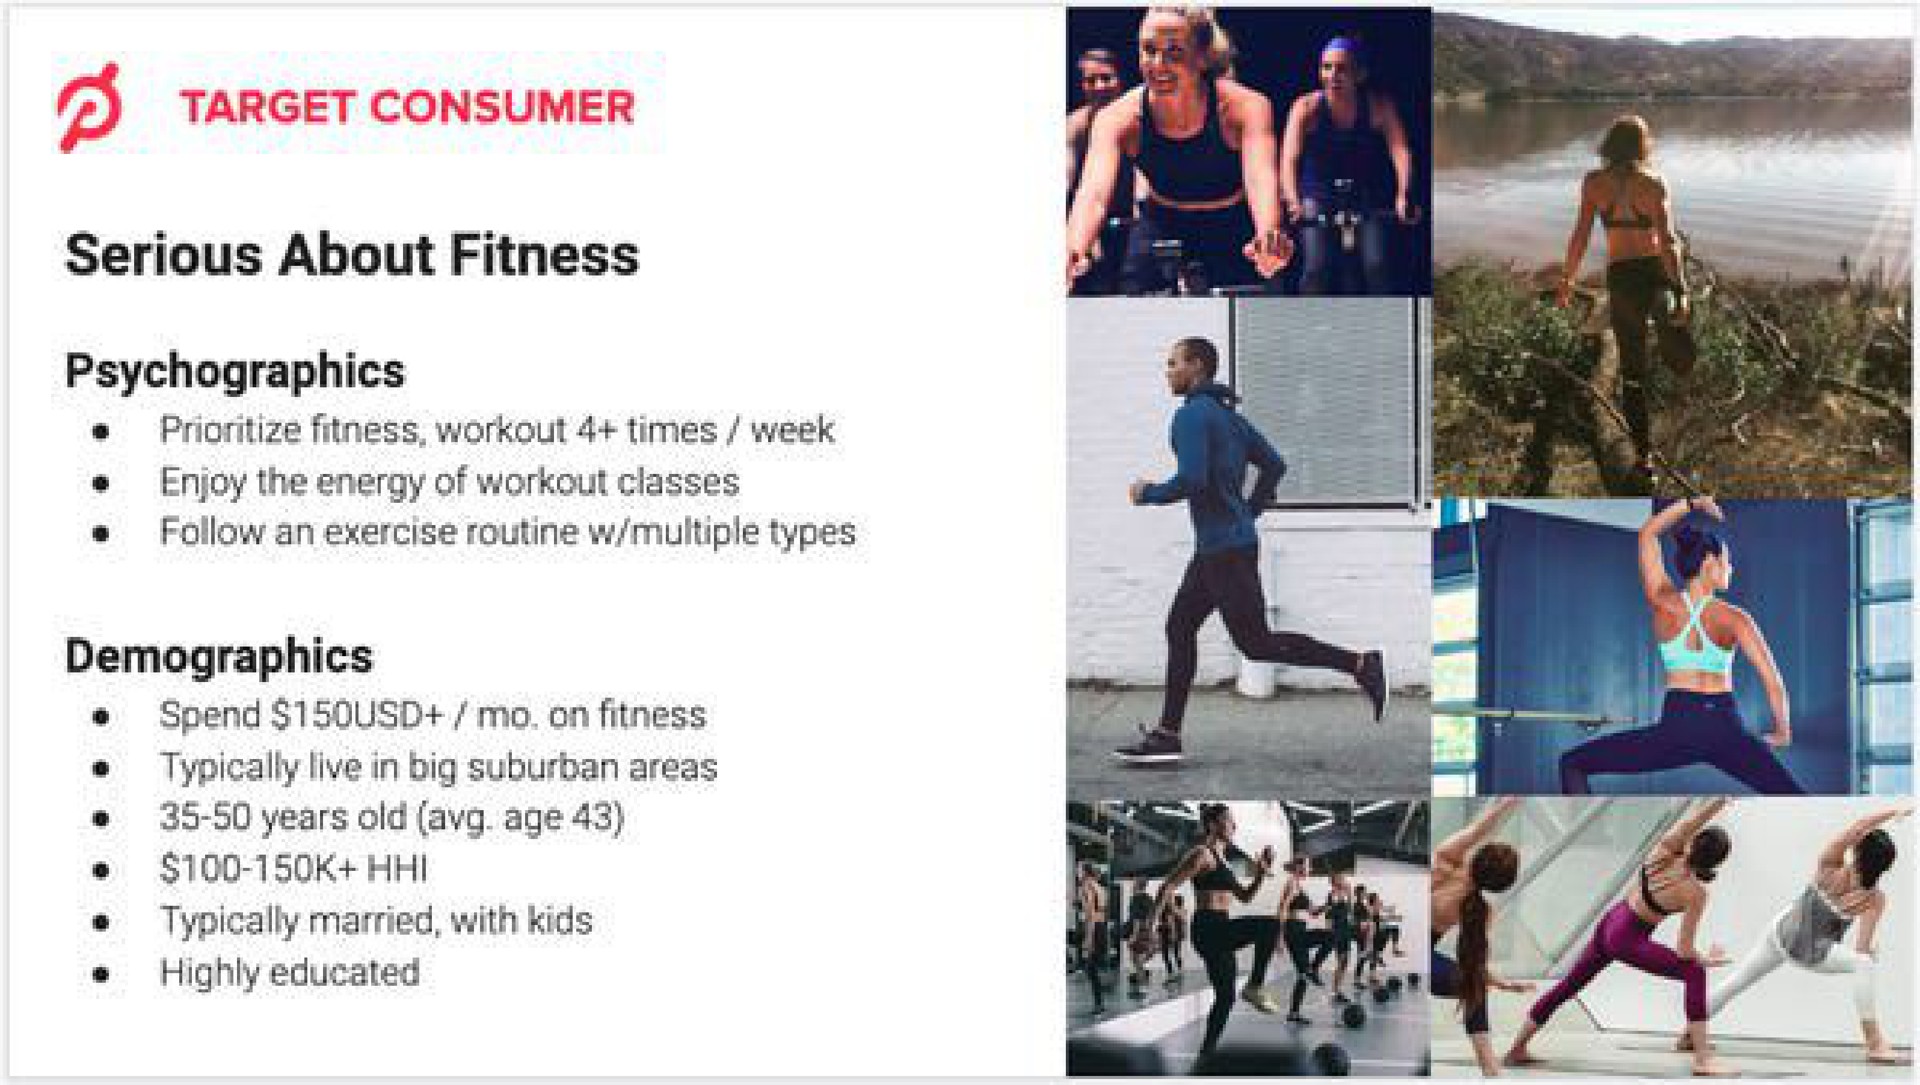 target consumer serious about fitness fitness workout times week enjoy the energy of workout classes follow an exercise routine multiple types demographics spend on fitness typically live in big suburban areas years old age typically married with highly educated | Peloton